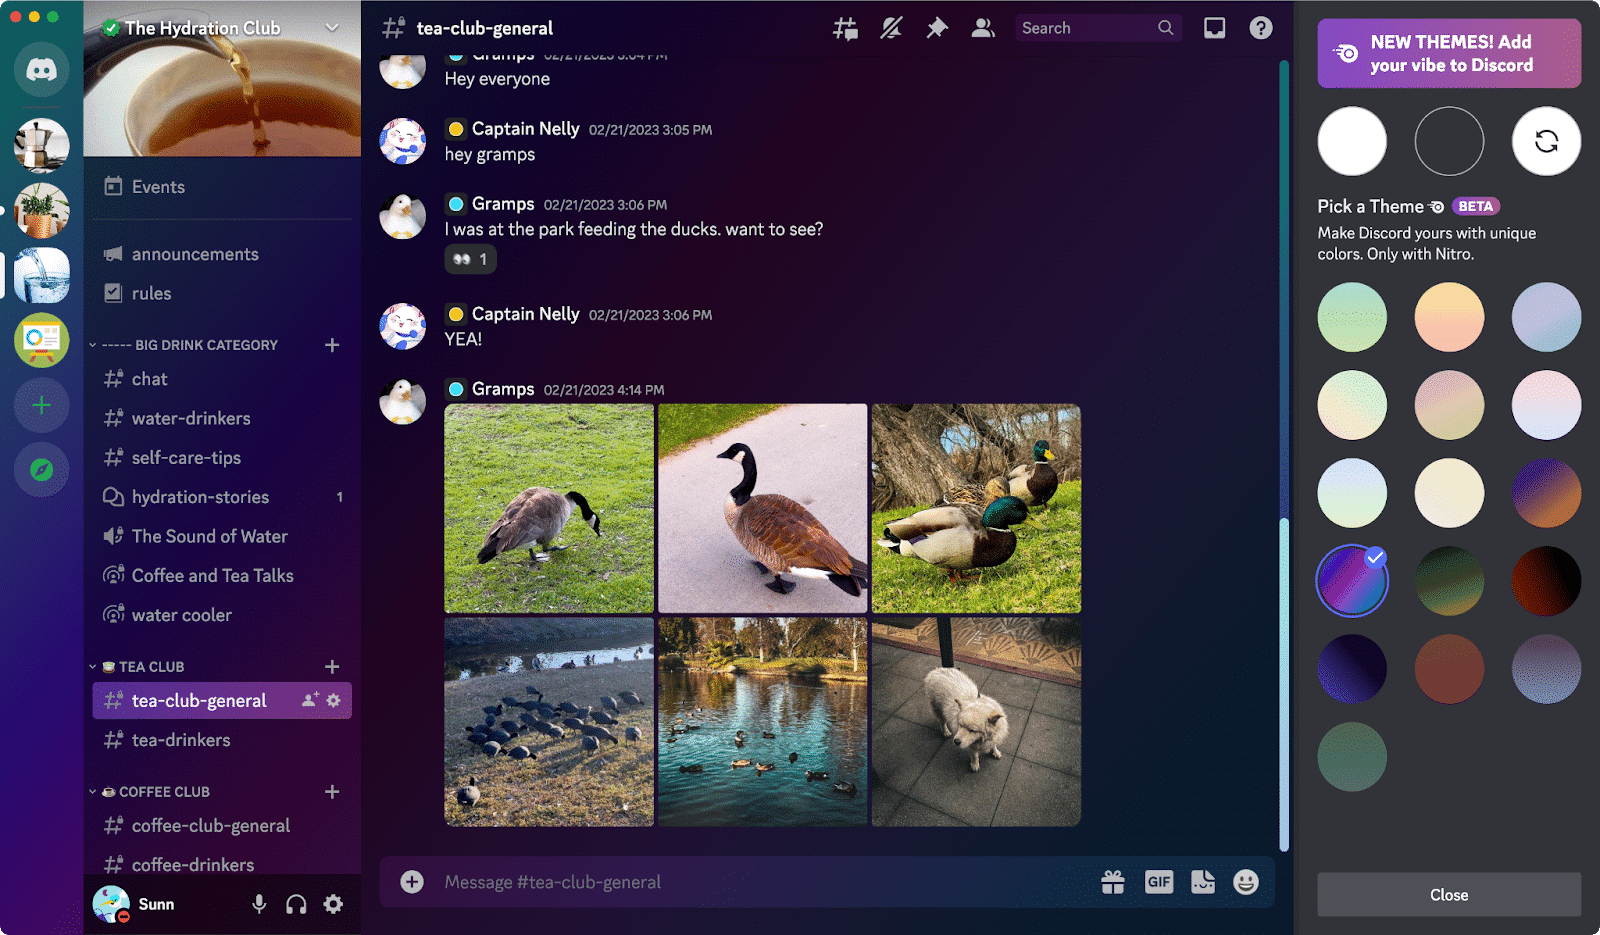 Discord Themes Now Lets You Change The Look Of The App, But Only For Nitro Subscribers 28